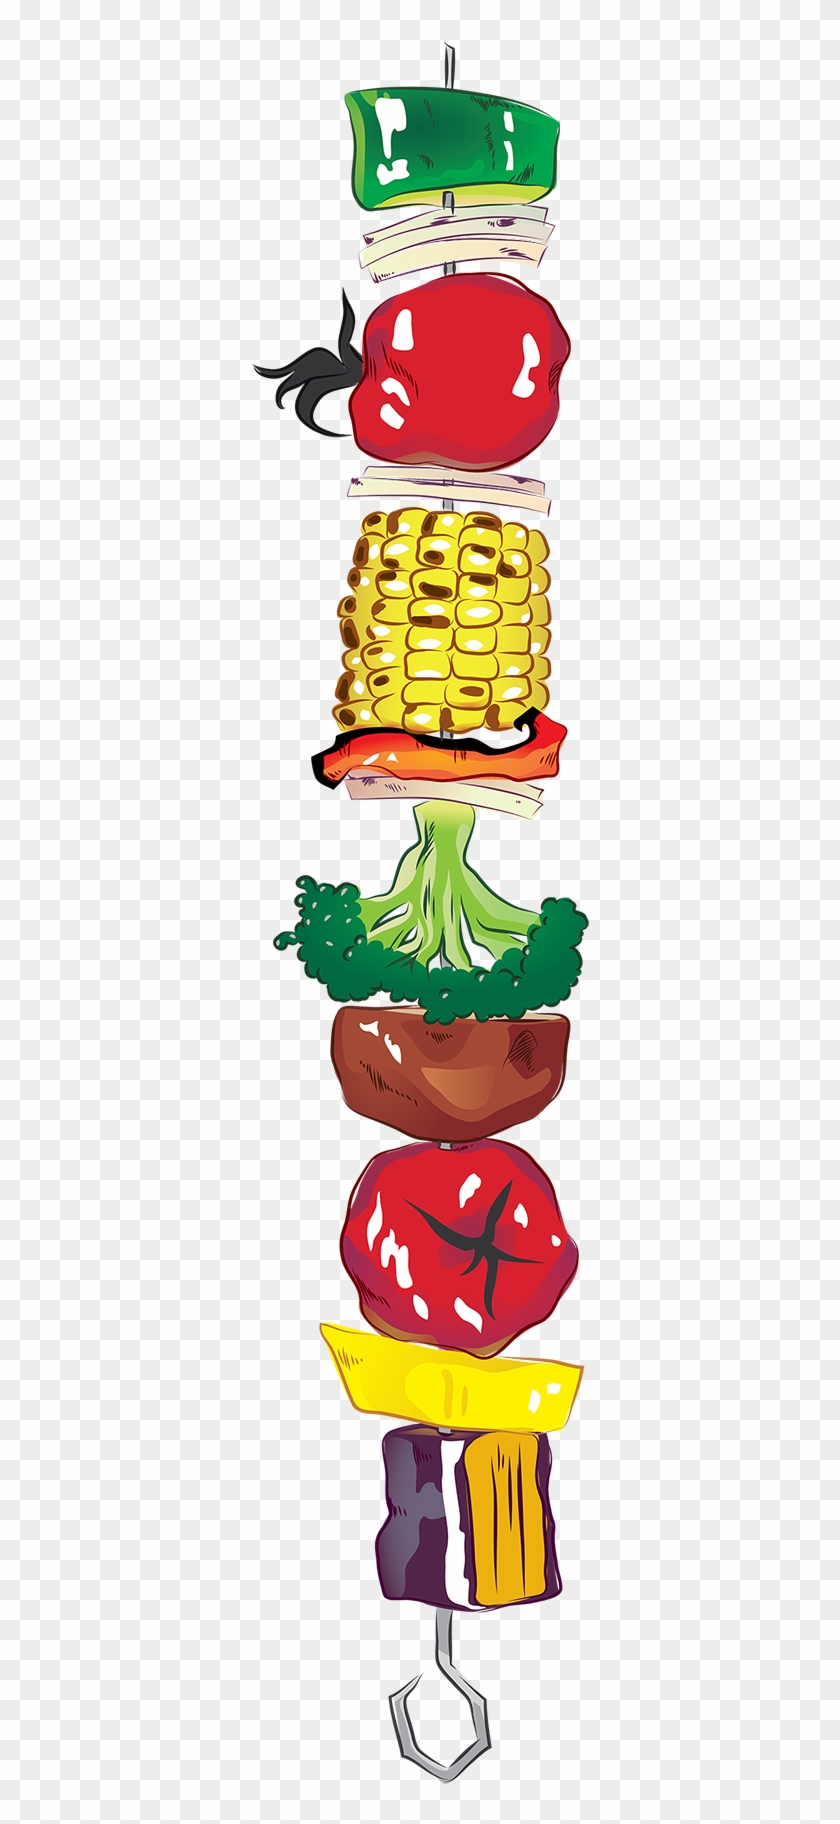 Veggie Kabob Illustrated For An Incentive Poster I - Veggie Kabob Illustrated For An Incentive Poster I #777827